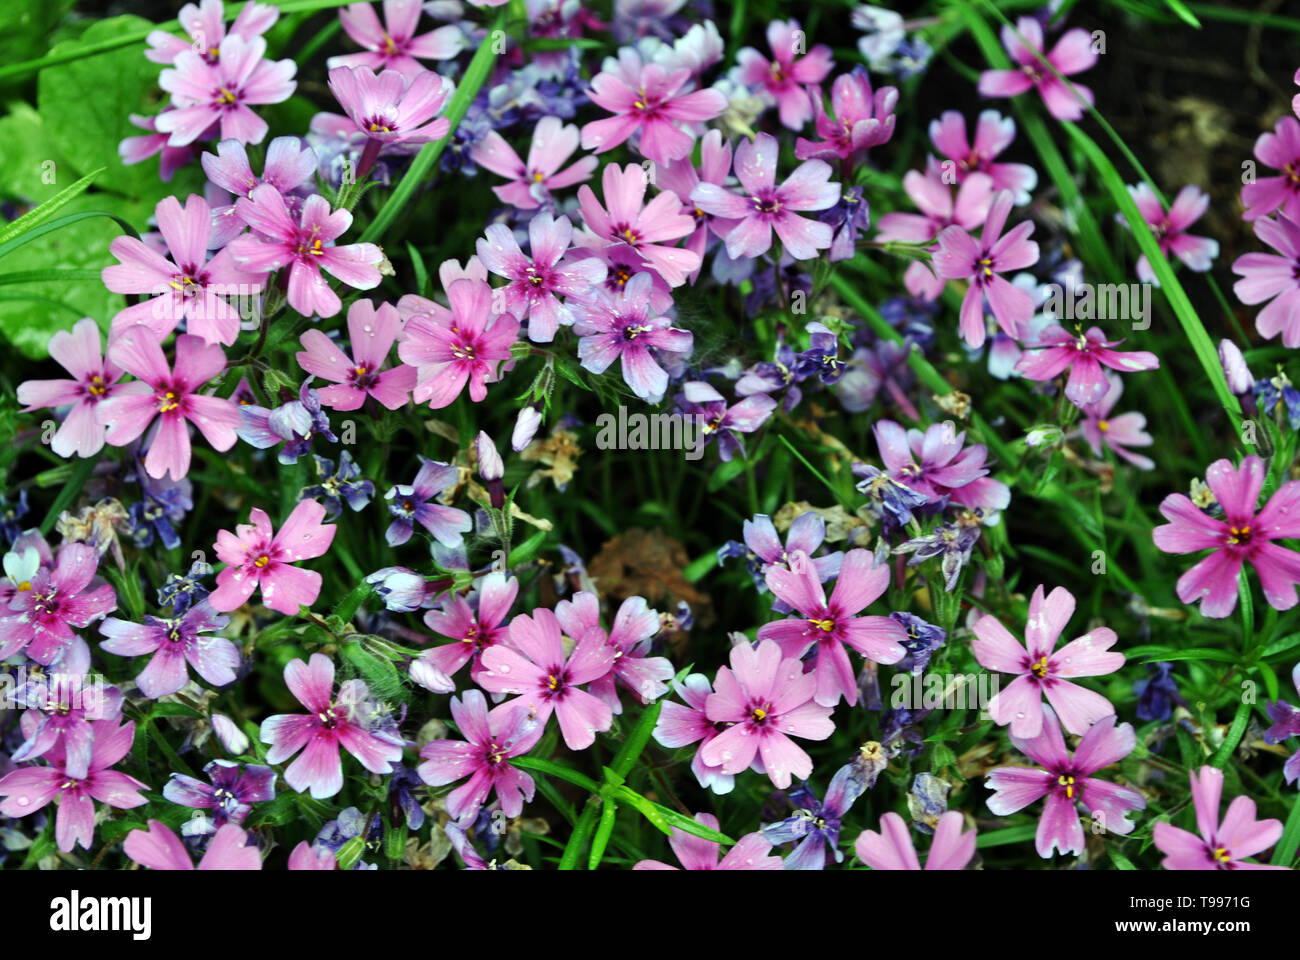 Dianthus deltoides (maiden pink) flowers background, close up detail Stock Photo